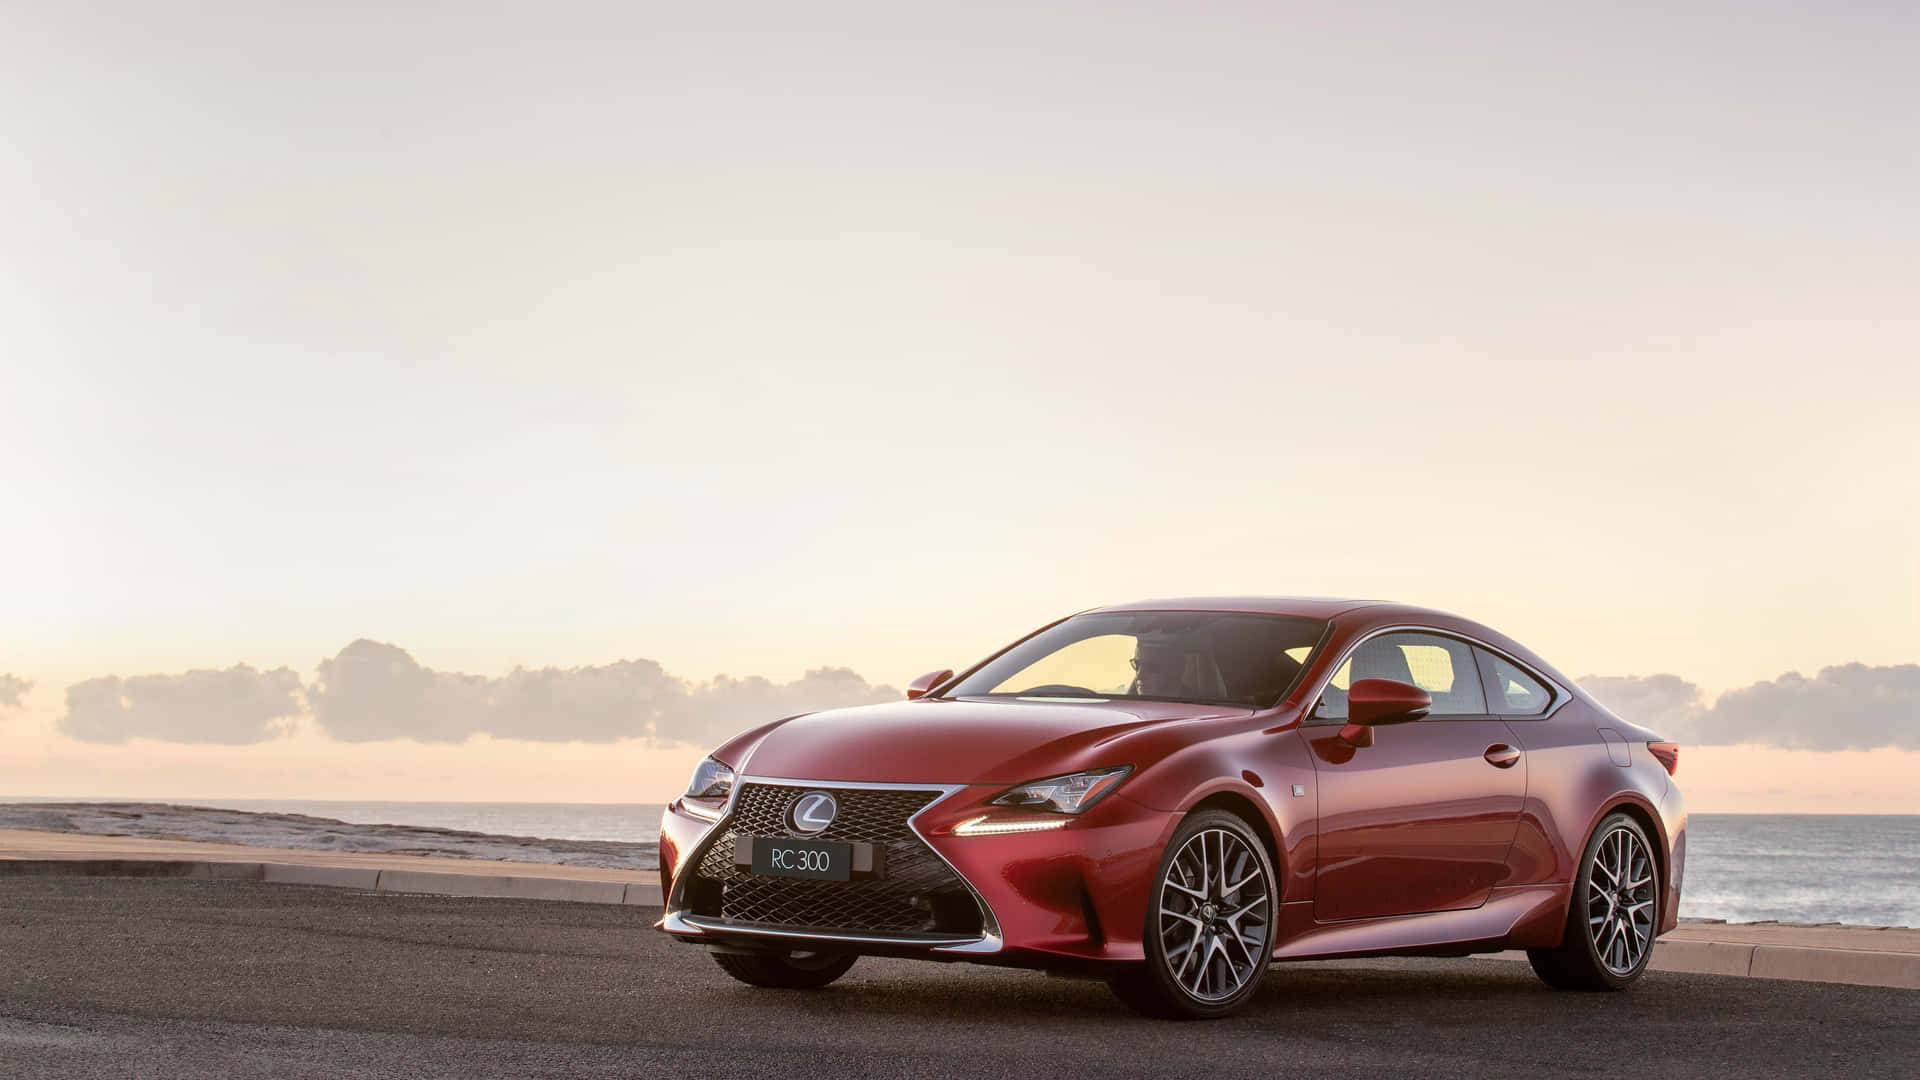 The Red Lexus Rc - F Coupe Is Parked On The Beach